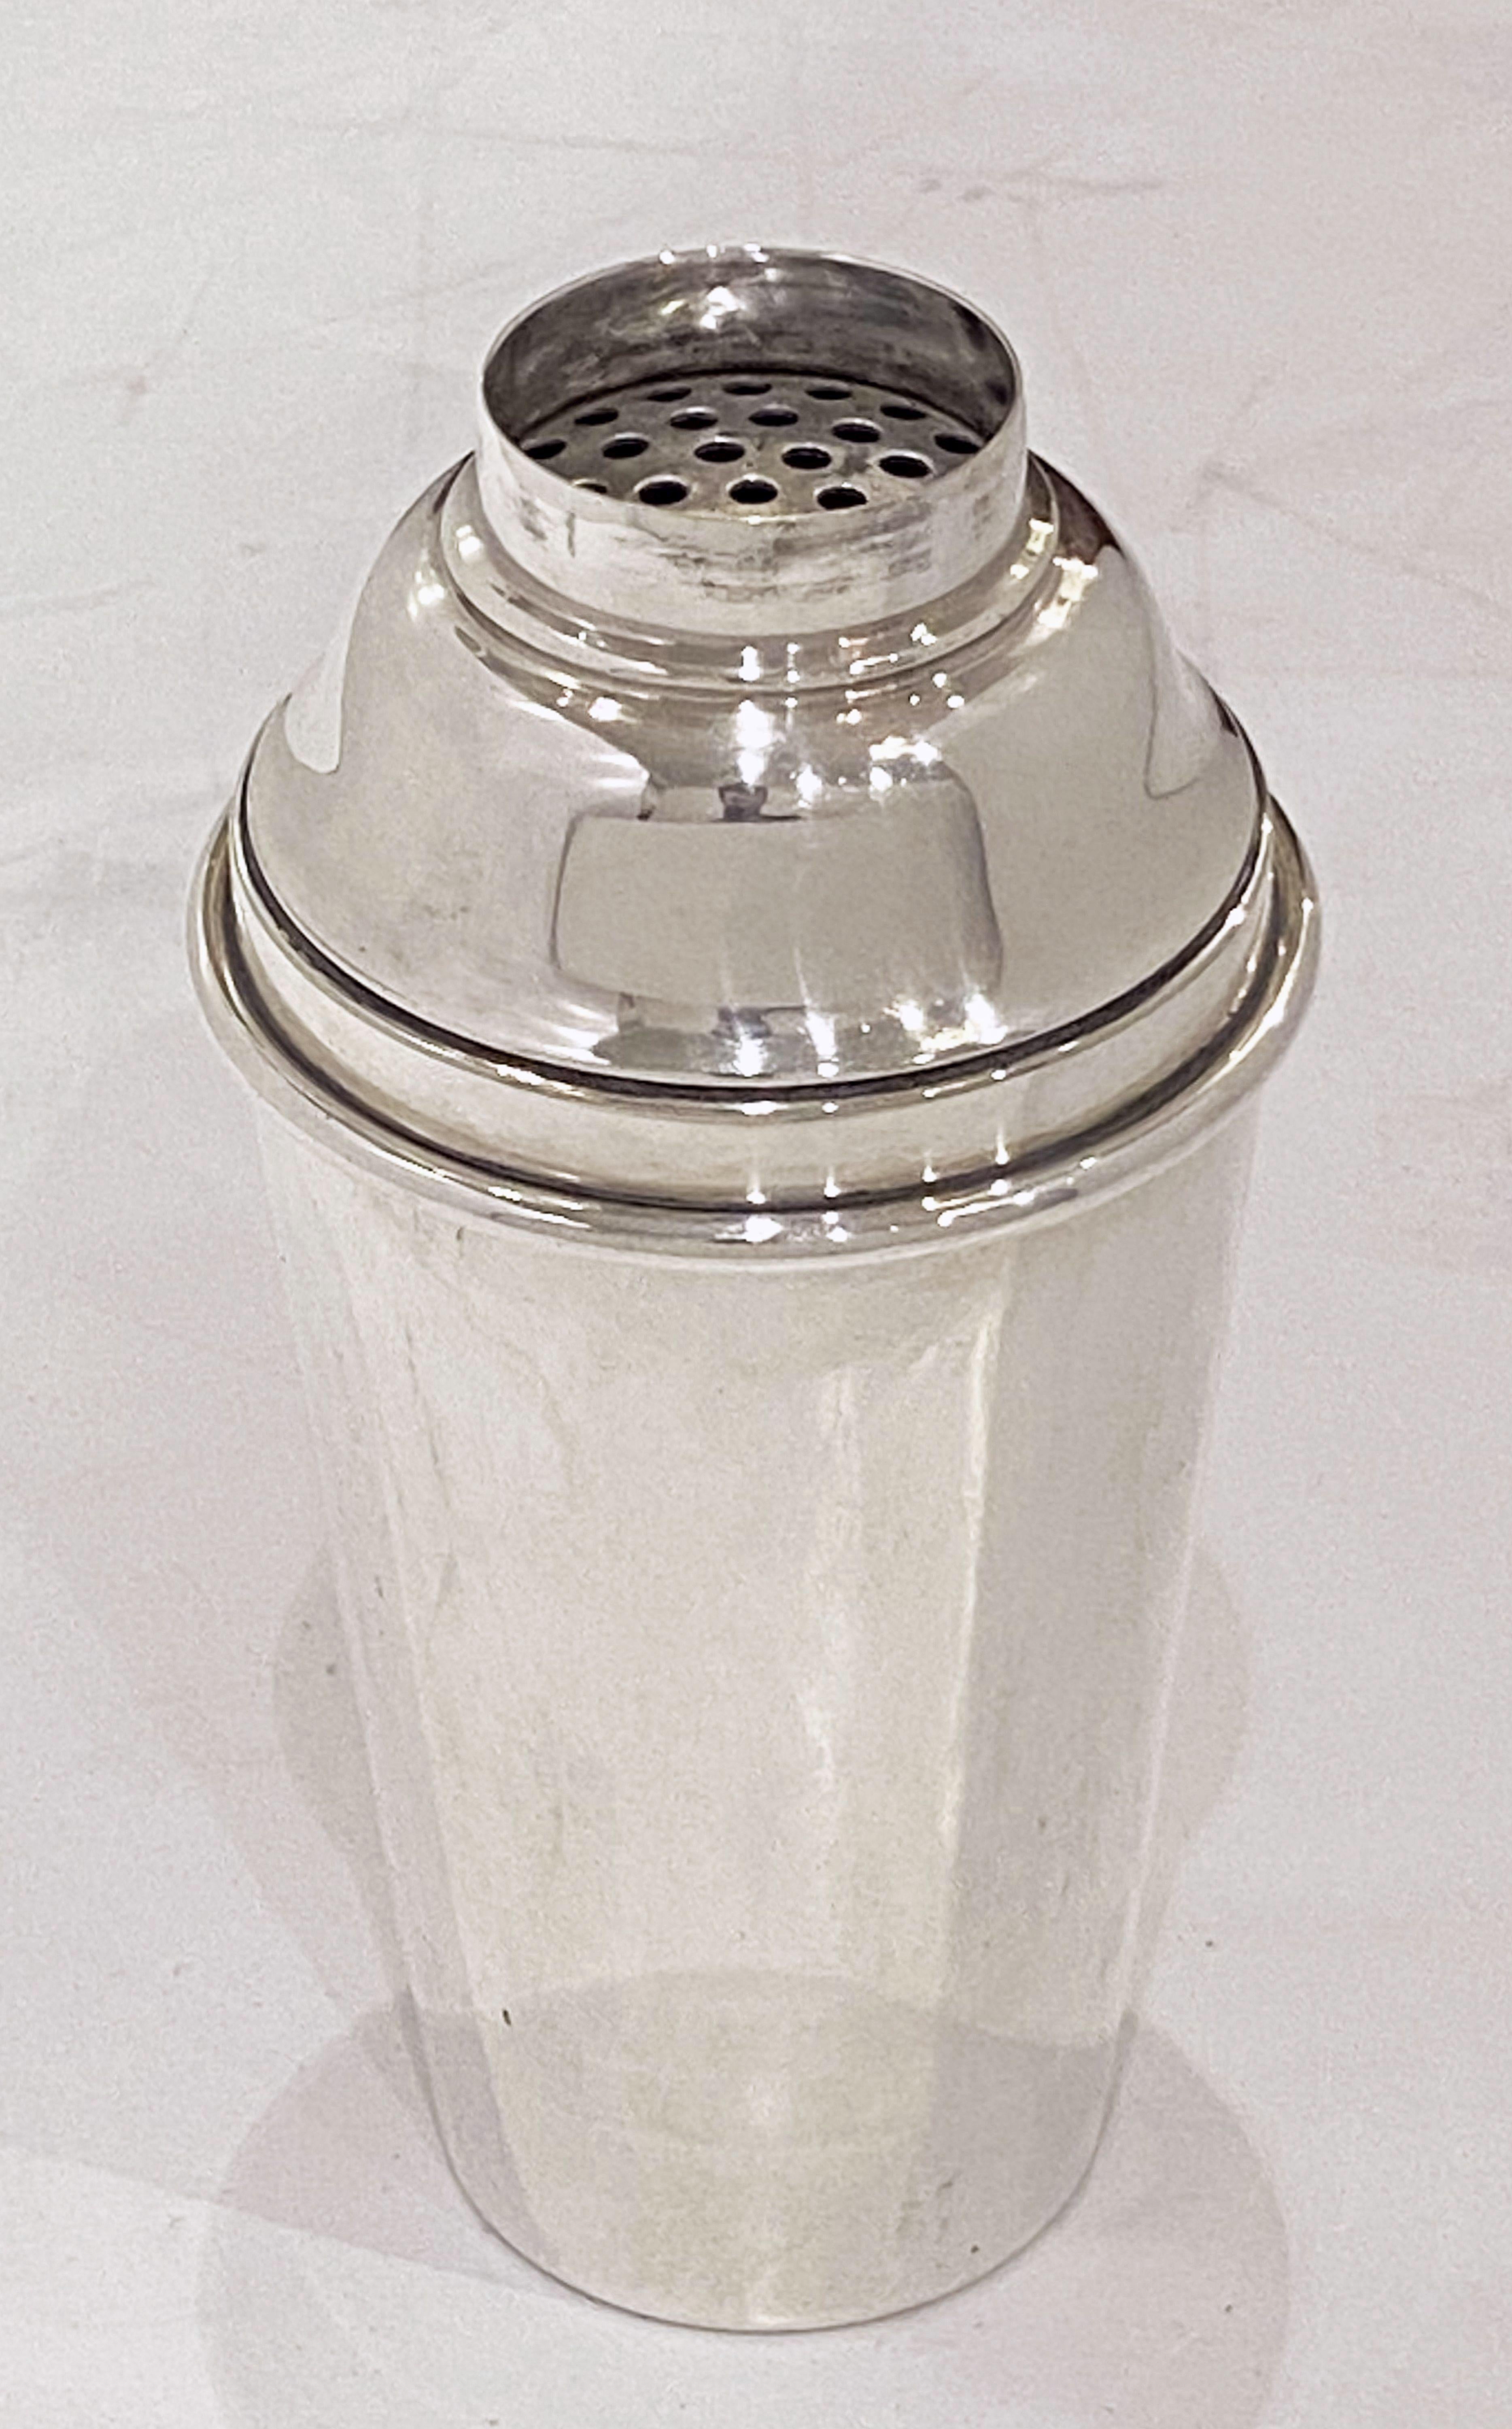 20th Century English Art Deco Cocktail or Martini Shaker by Gaskell and Chambers